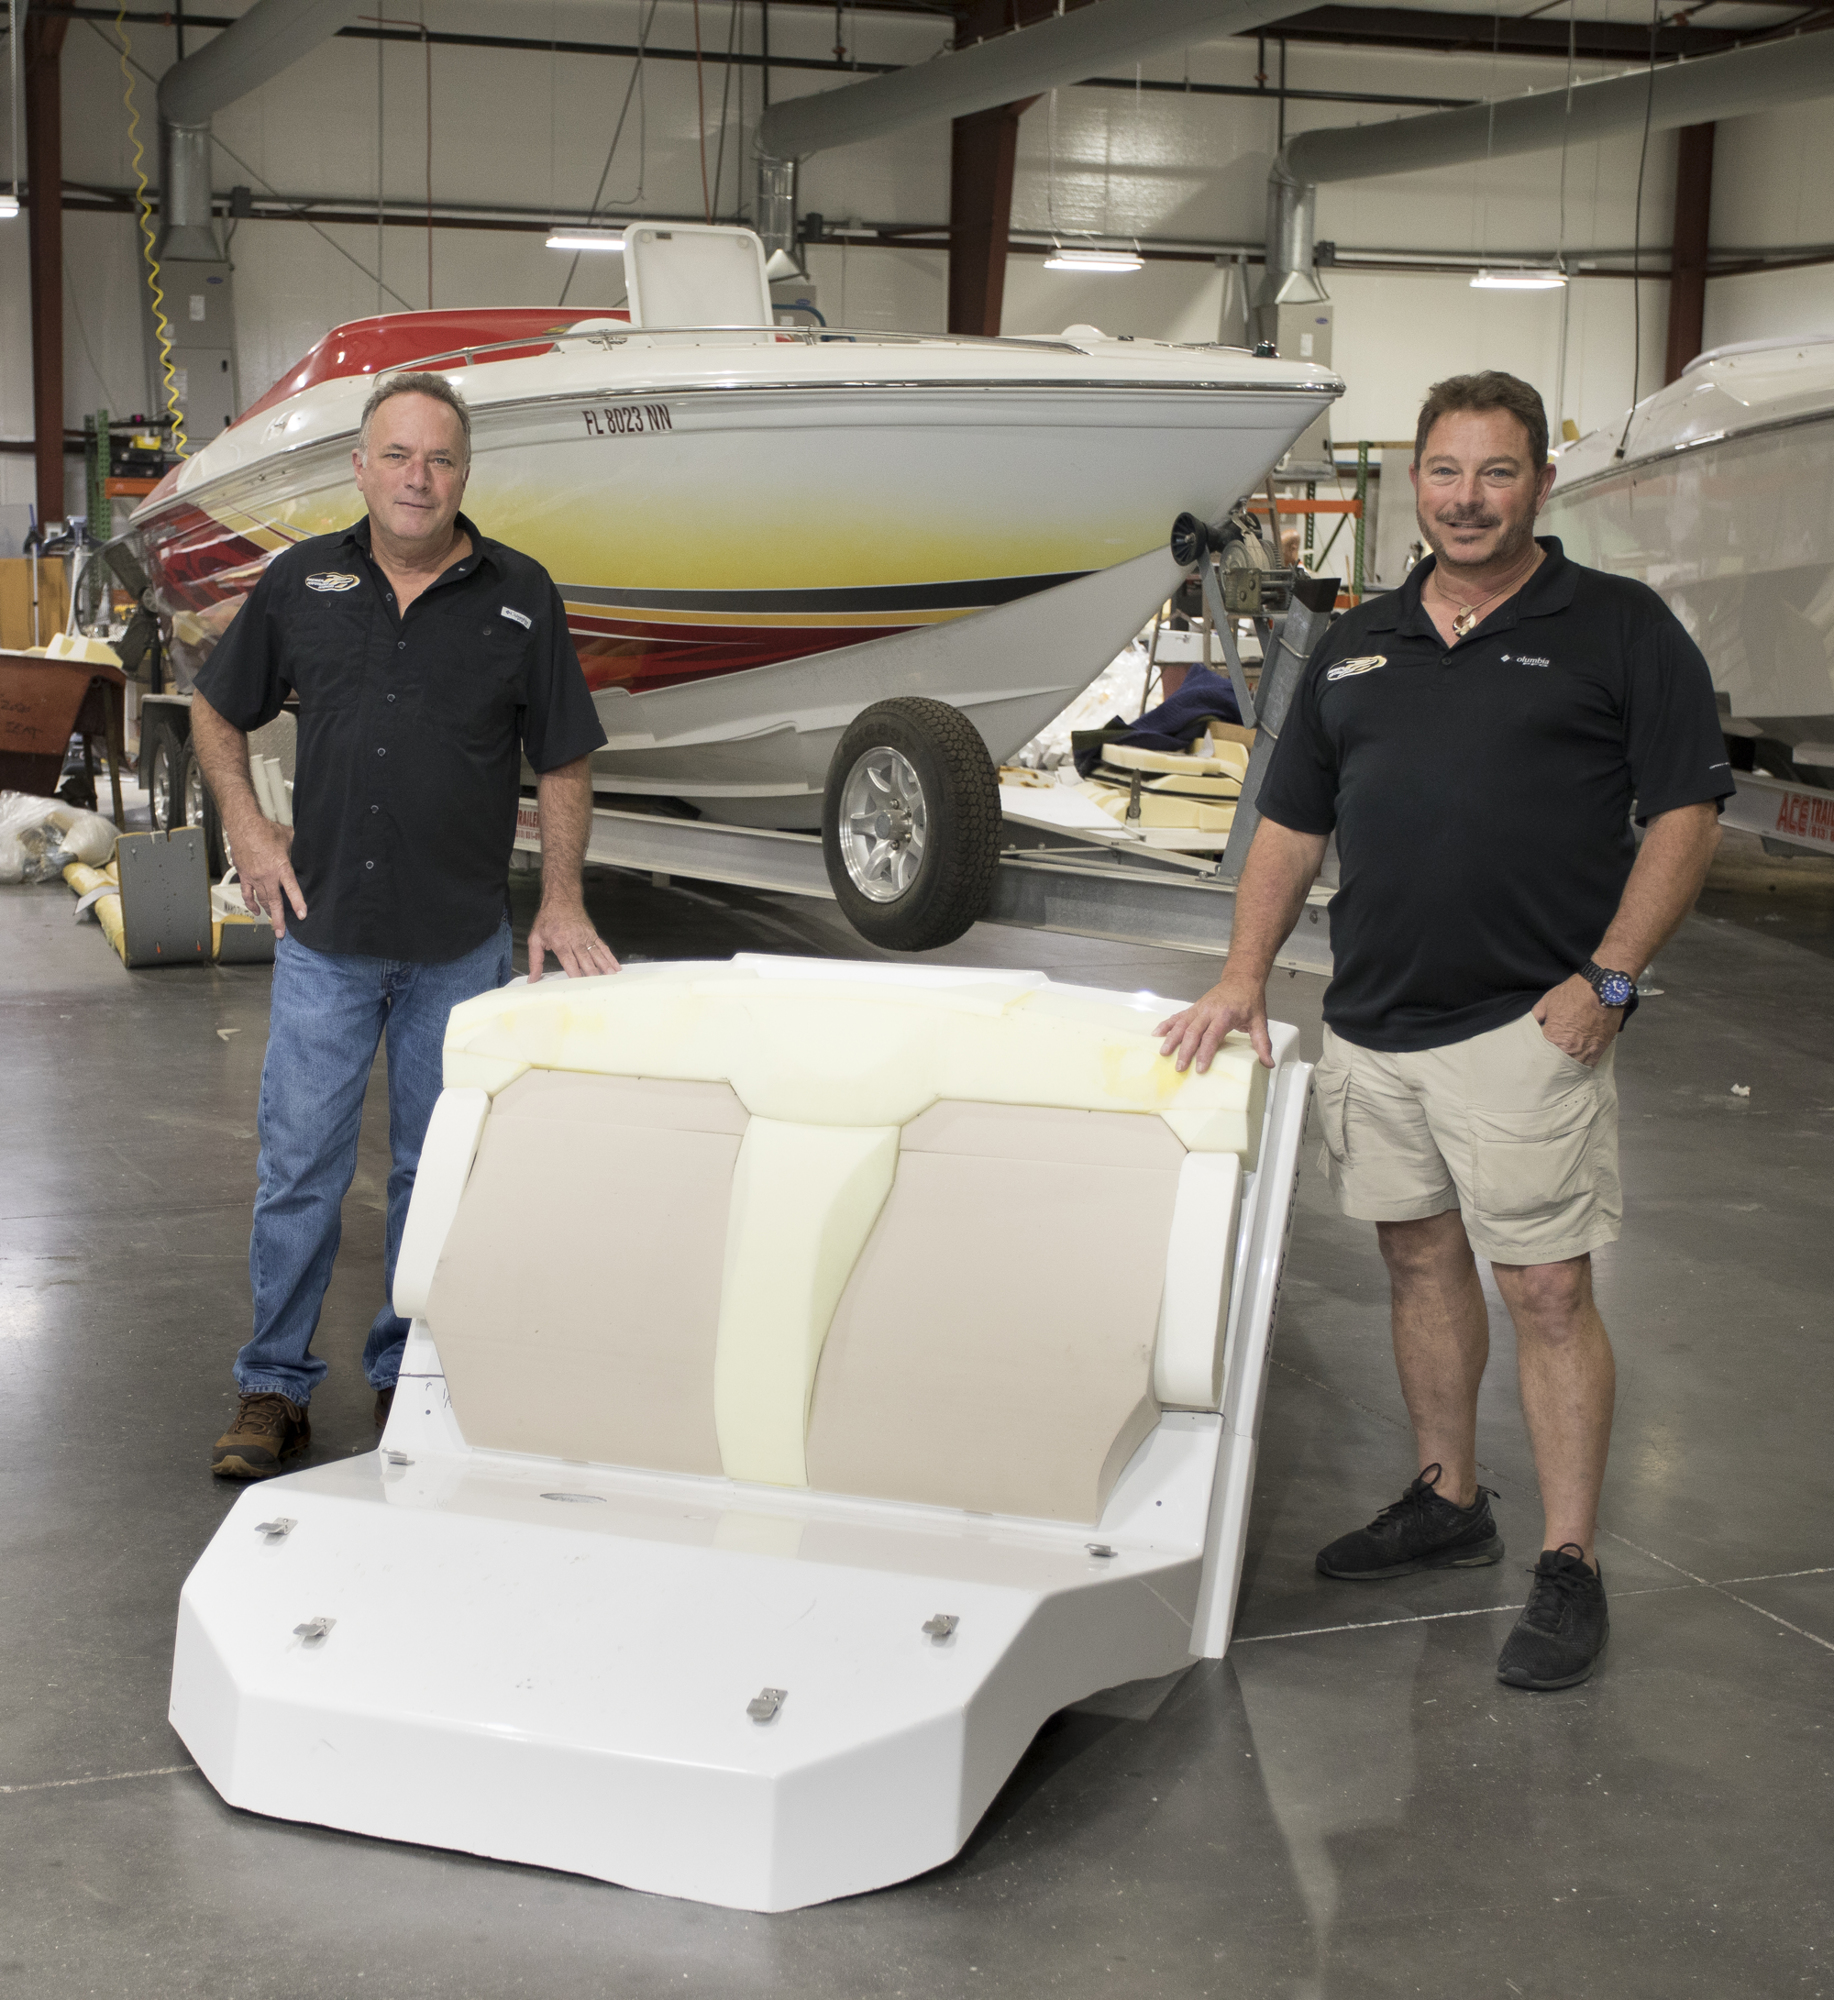 Mark Wemple. Lee Wingard and Jim Cowan founded Sarasota-based Premier Performance Interiors after running competing boat upholstery businesses.